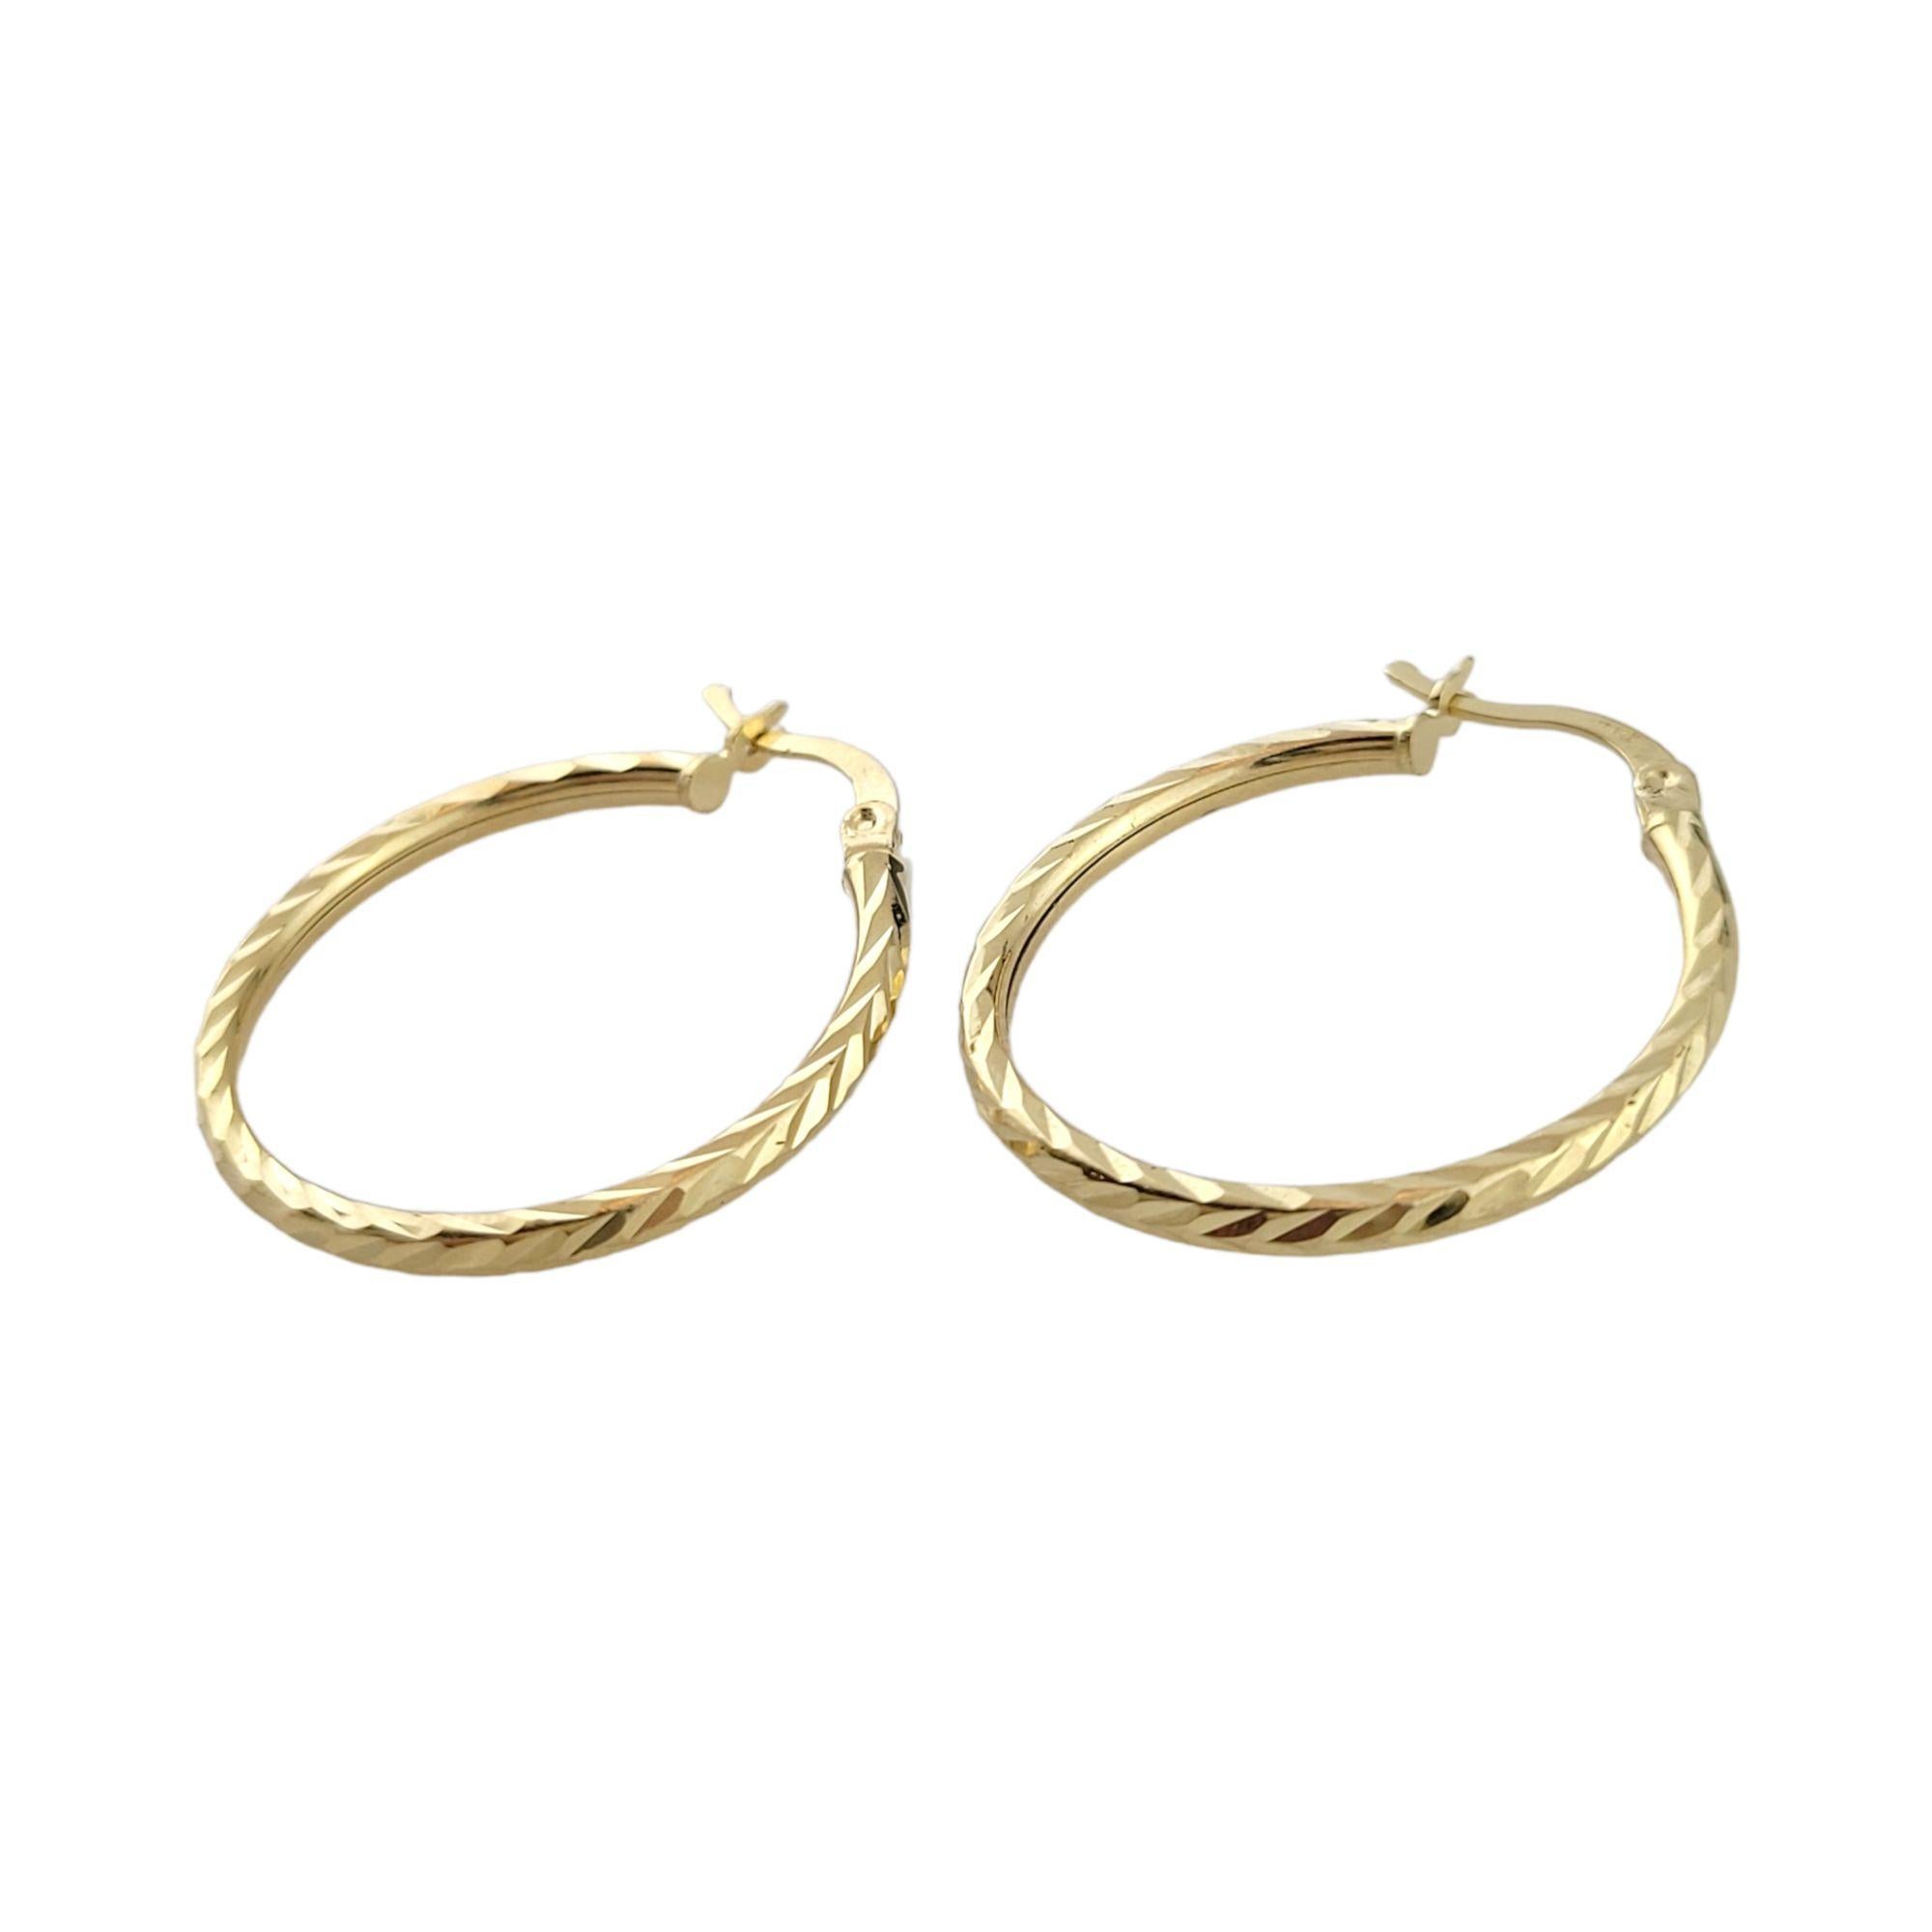 14K Yellow Gold Hoops

Beautiful set of 14K gold hoops with a gorgeous textured finish!

Size: 30mm X 27mm X 2mm

Weight: 2.3 g/ 1.4 dwt

Hallmark: 14K

Very good condition, professionally polished.

Will come packaged in a gift box or pouch (when